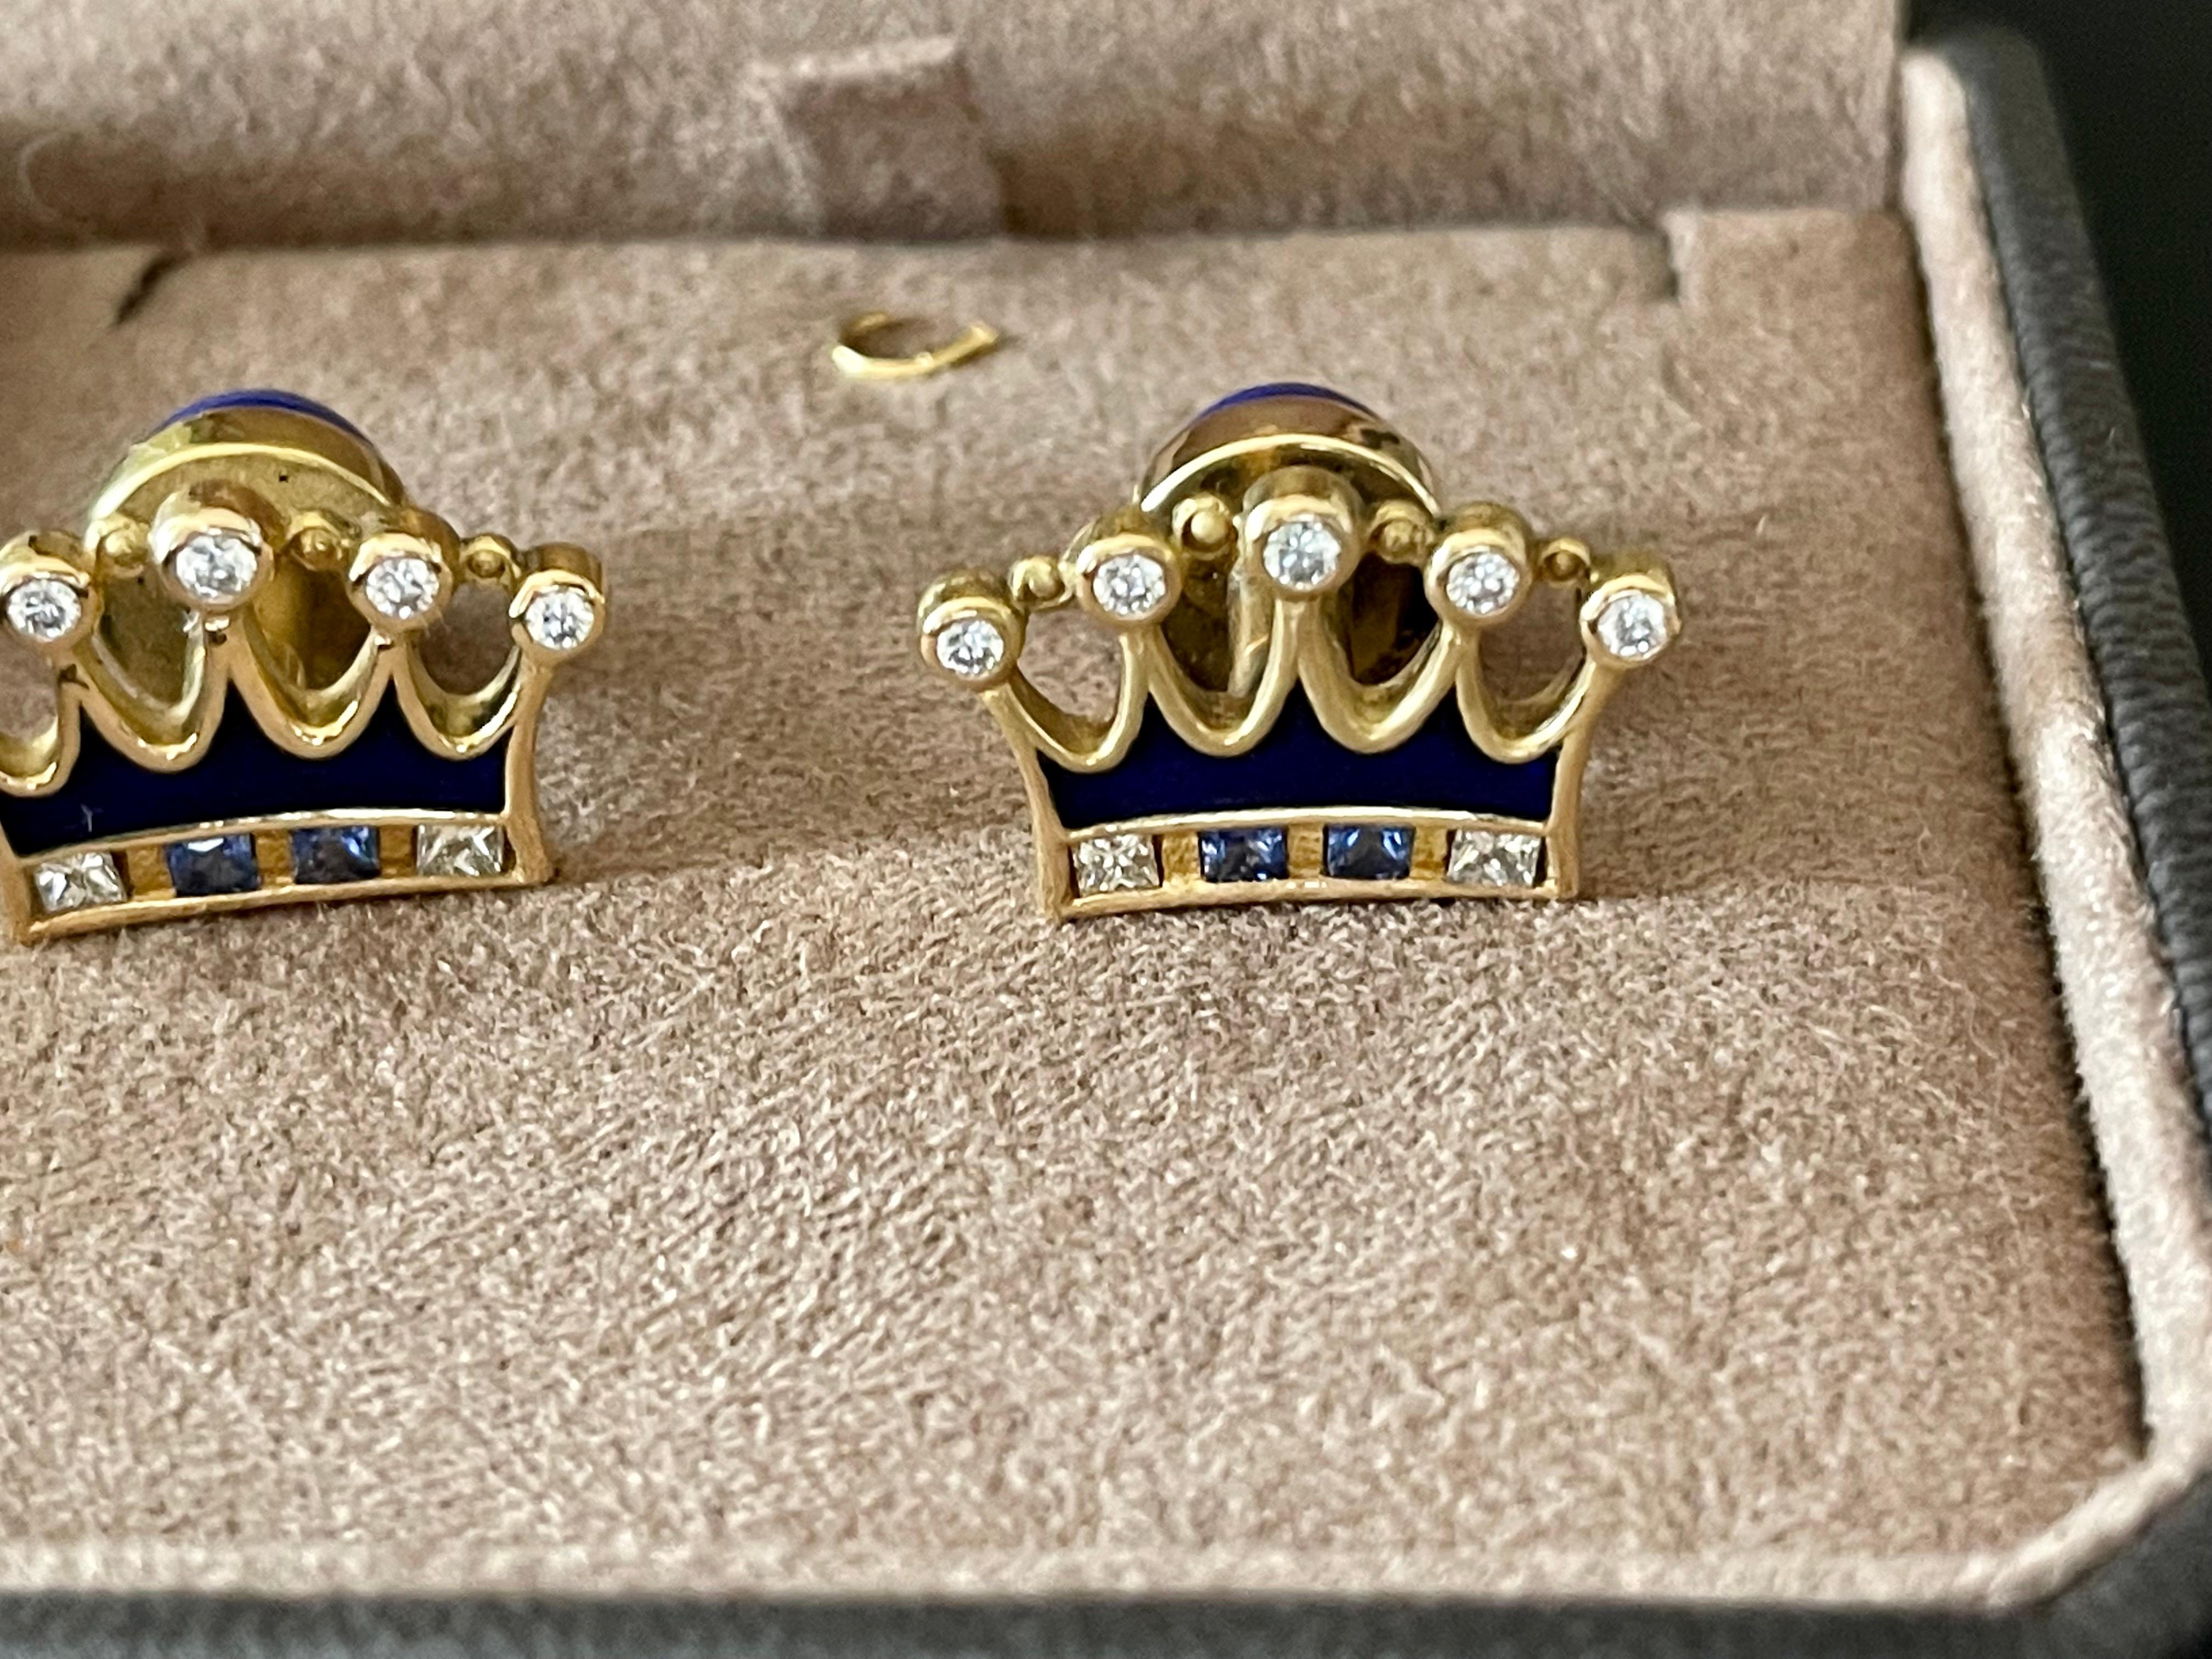 A pair of very attractive 18 K yellow Gold cufflinks featuring 14 round brilliant cut Diaomds weighing approximately 0.40 ct, accentuated by 4 square cut blue Sapphires weighing approximately 0.42 ct. Blue enamel. The back part of the cufflinks are